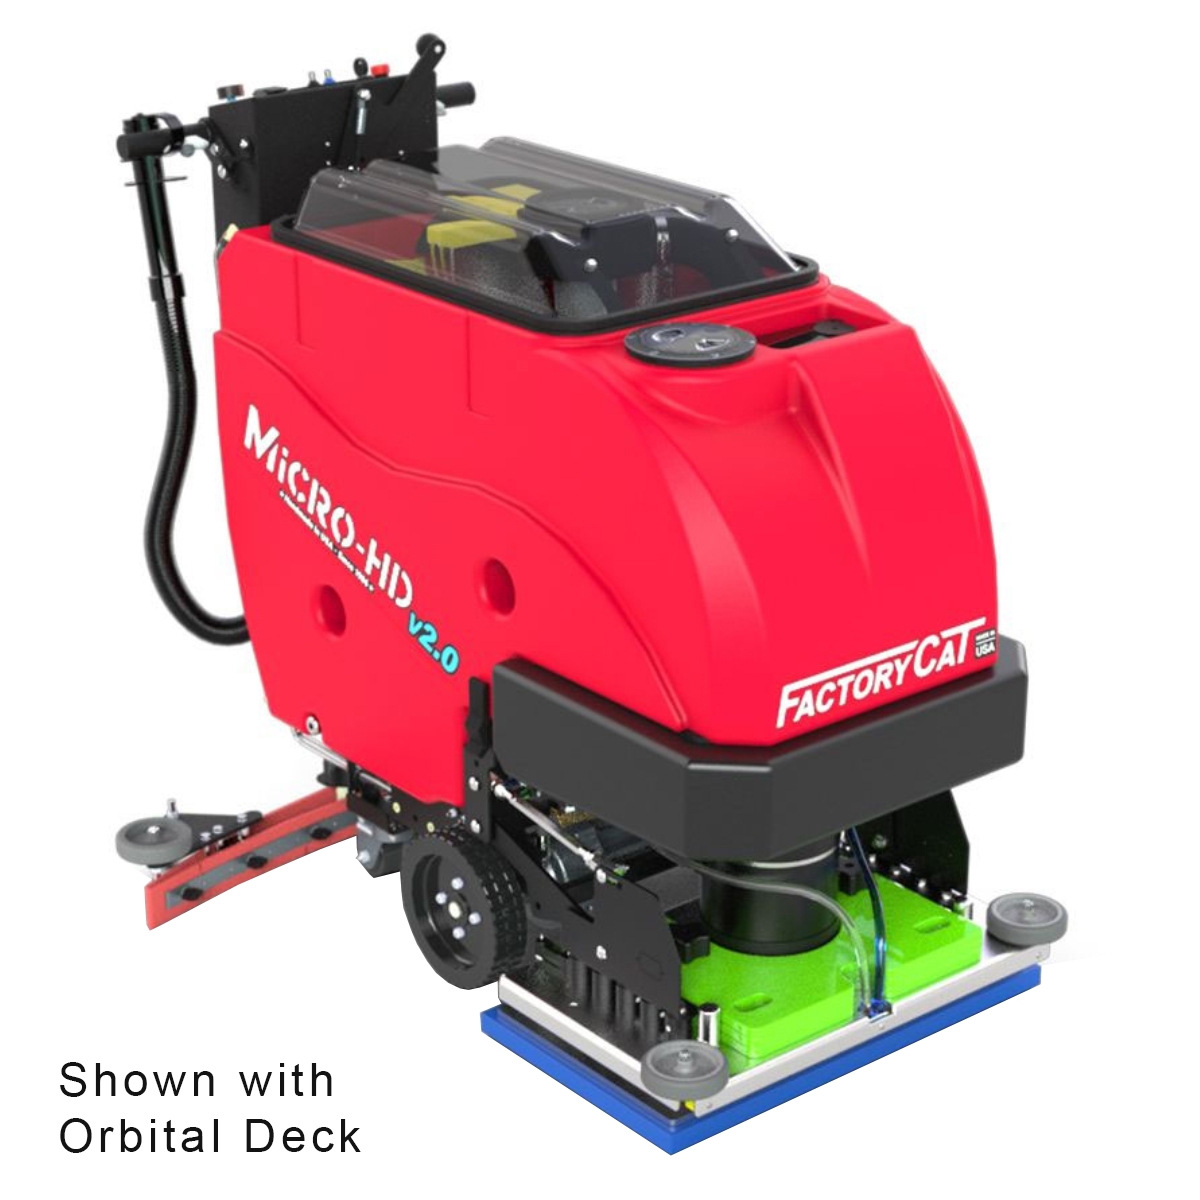 FactoryCat MICRO-HD Floor Scrubber is known for its simple design and durable construction, it is sitting at an angle showing a 3/4 view of the bright red and black machine. It is sporting the Orbital Deck option.